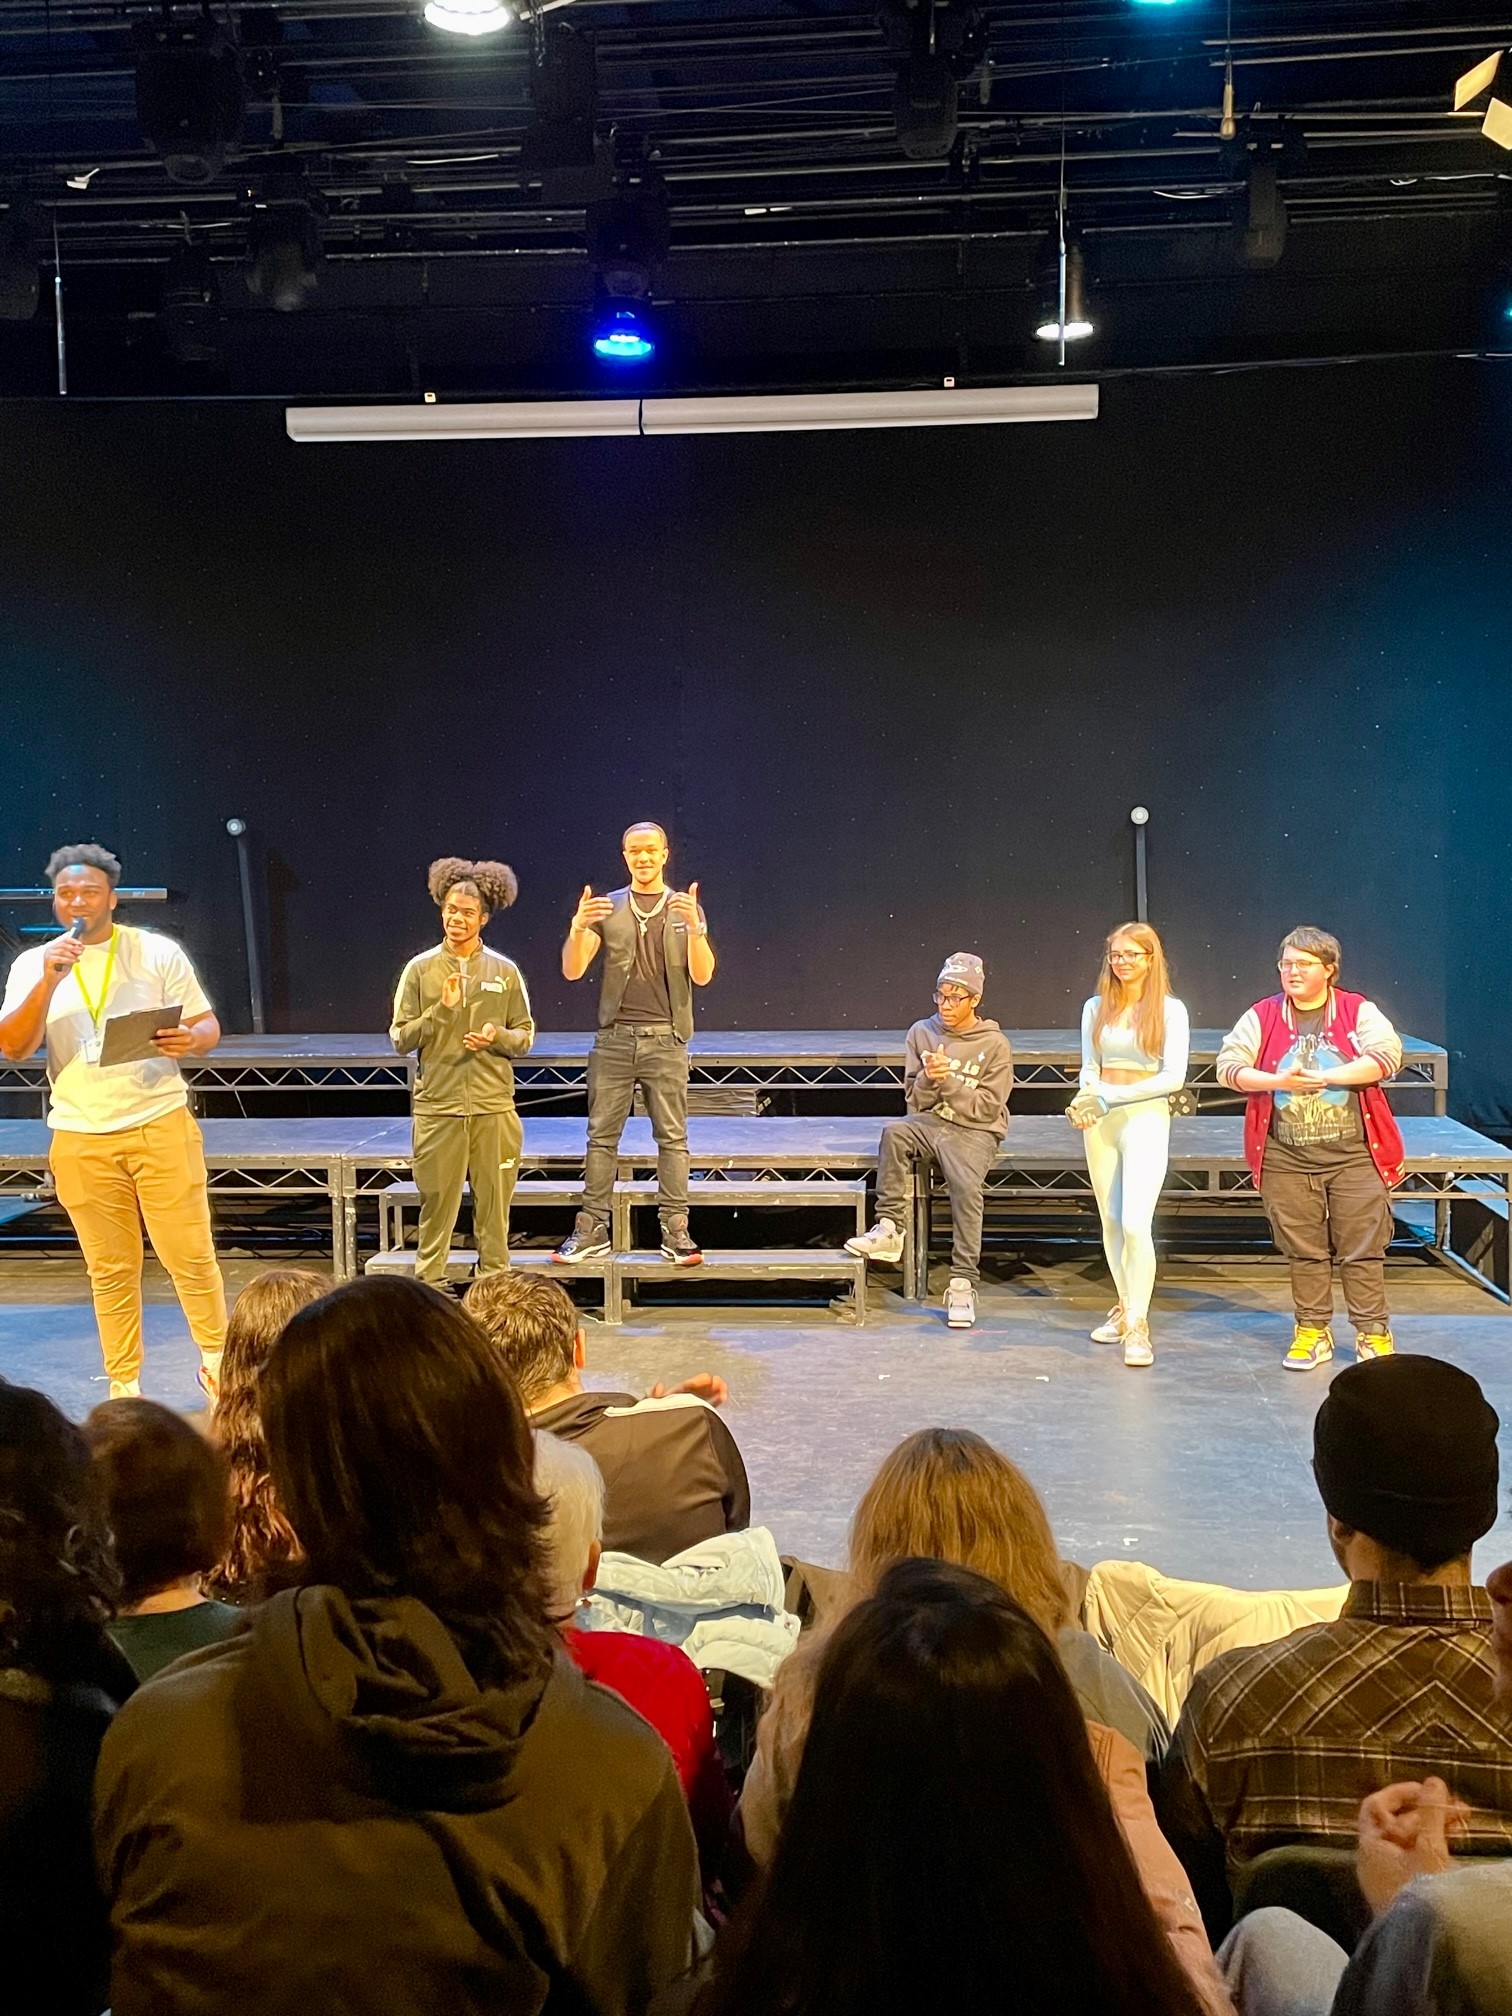 Kingston’s Got Talent – students wow judges with phenomenal performances!